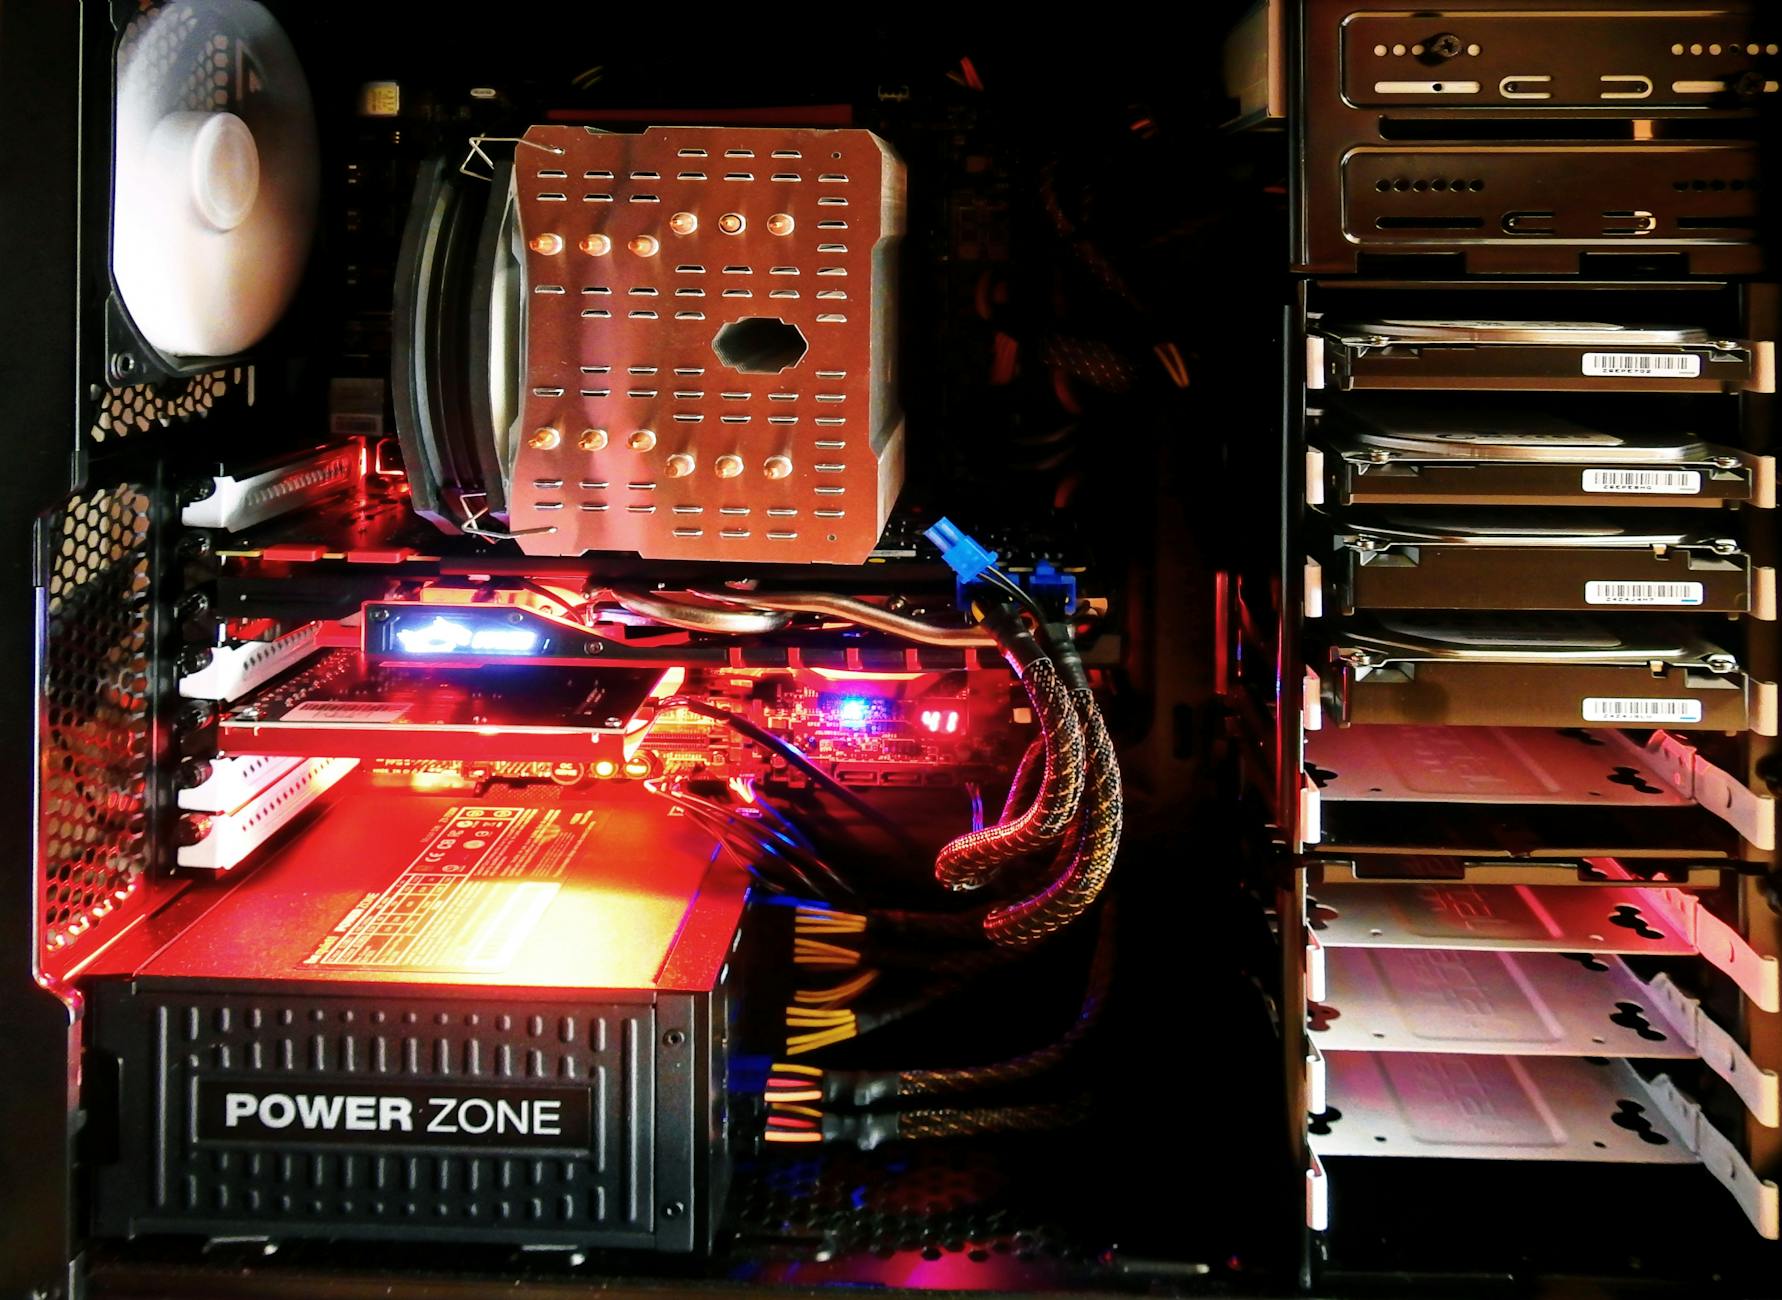 Picture of how an inside of a gaming rig looks with a bunch of RGB lights, RAM, power supply, motherboard and so on.